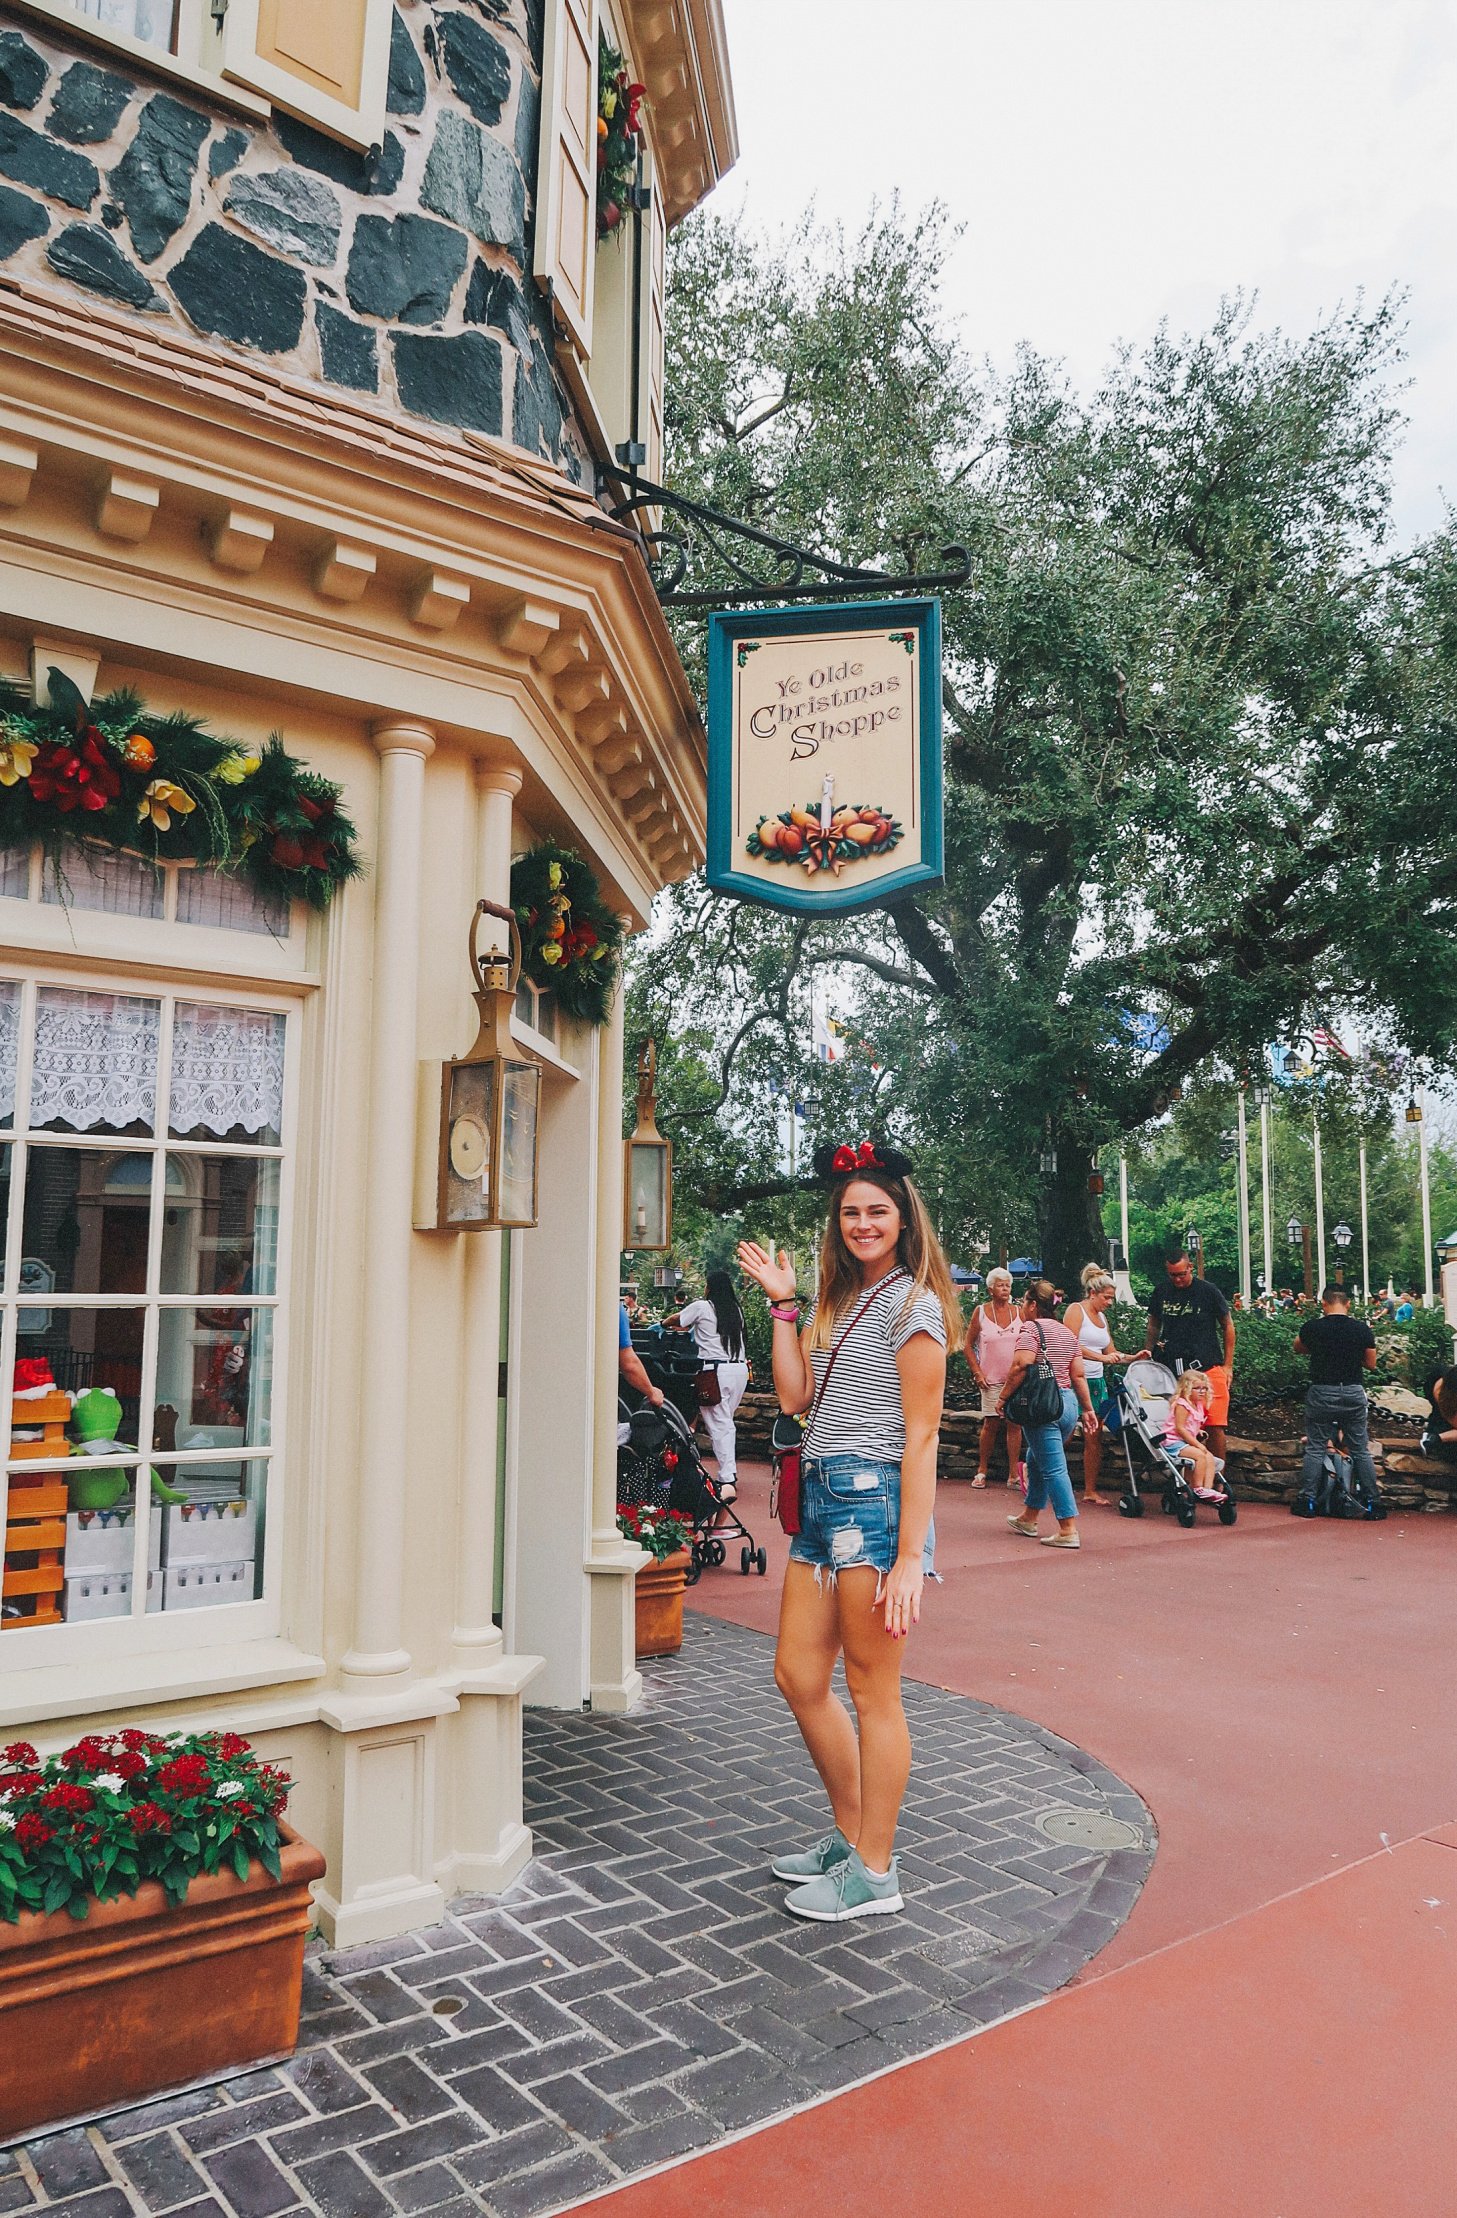 Our Day at Disney World's Magic Kingdom Christmas Store